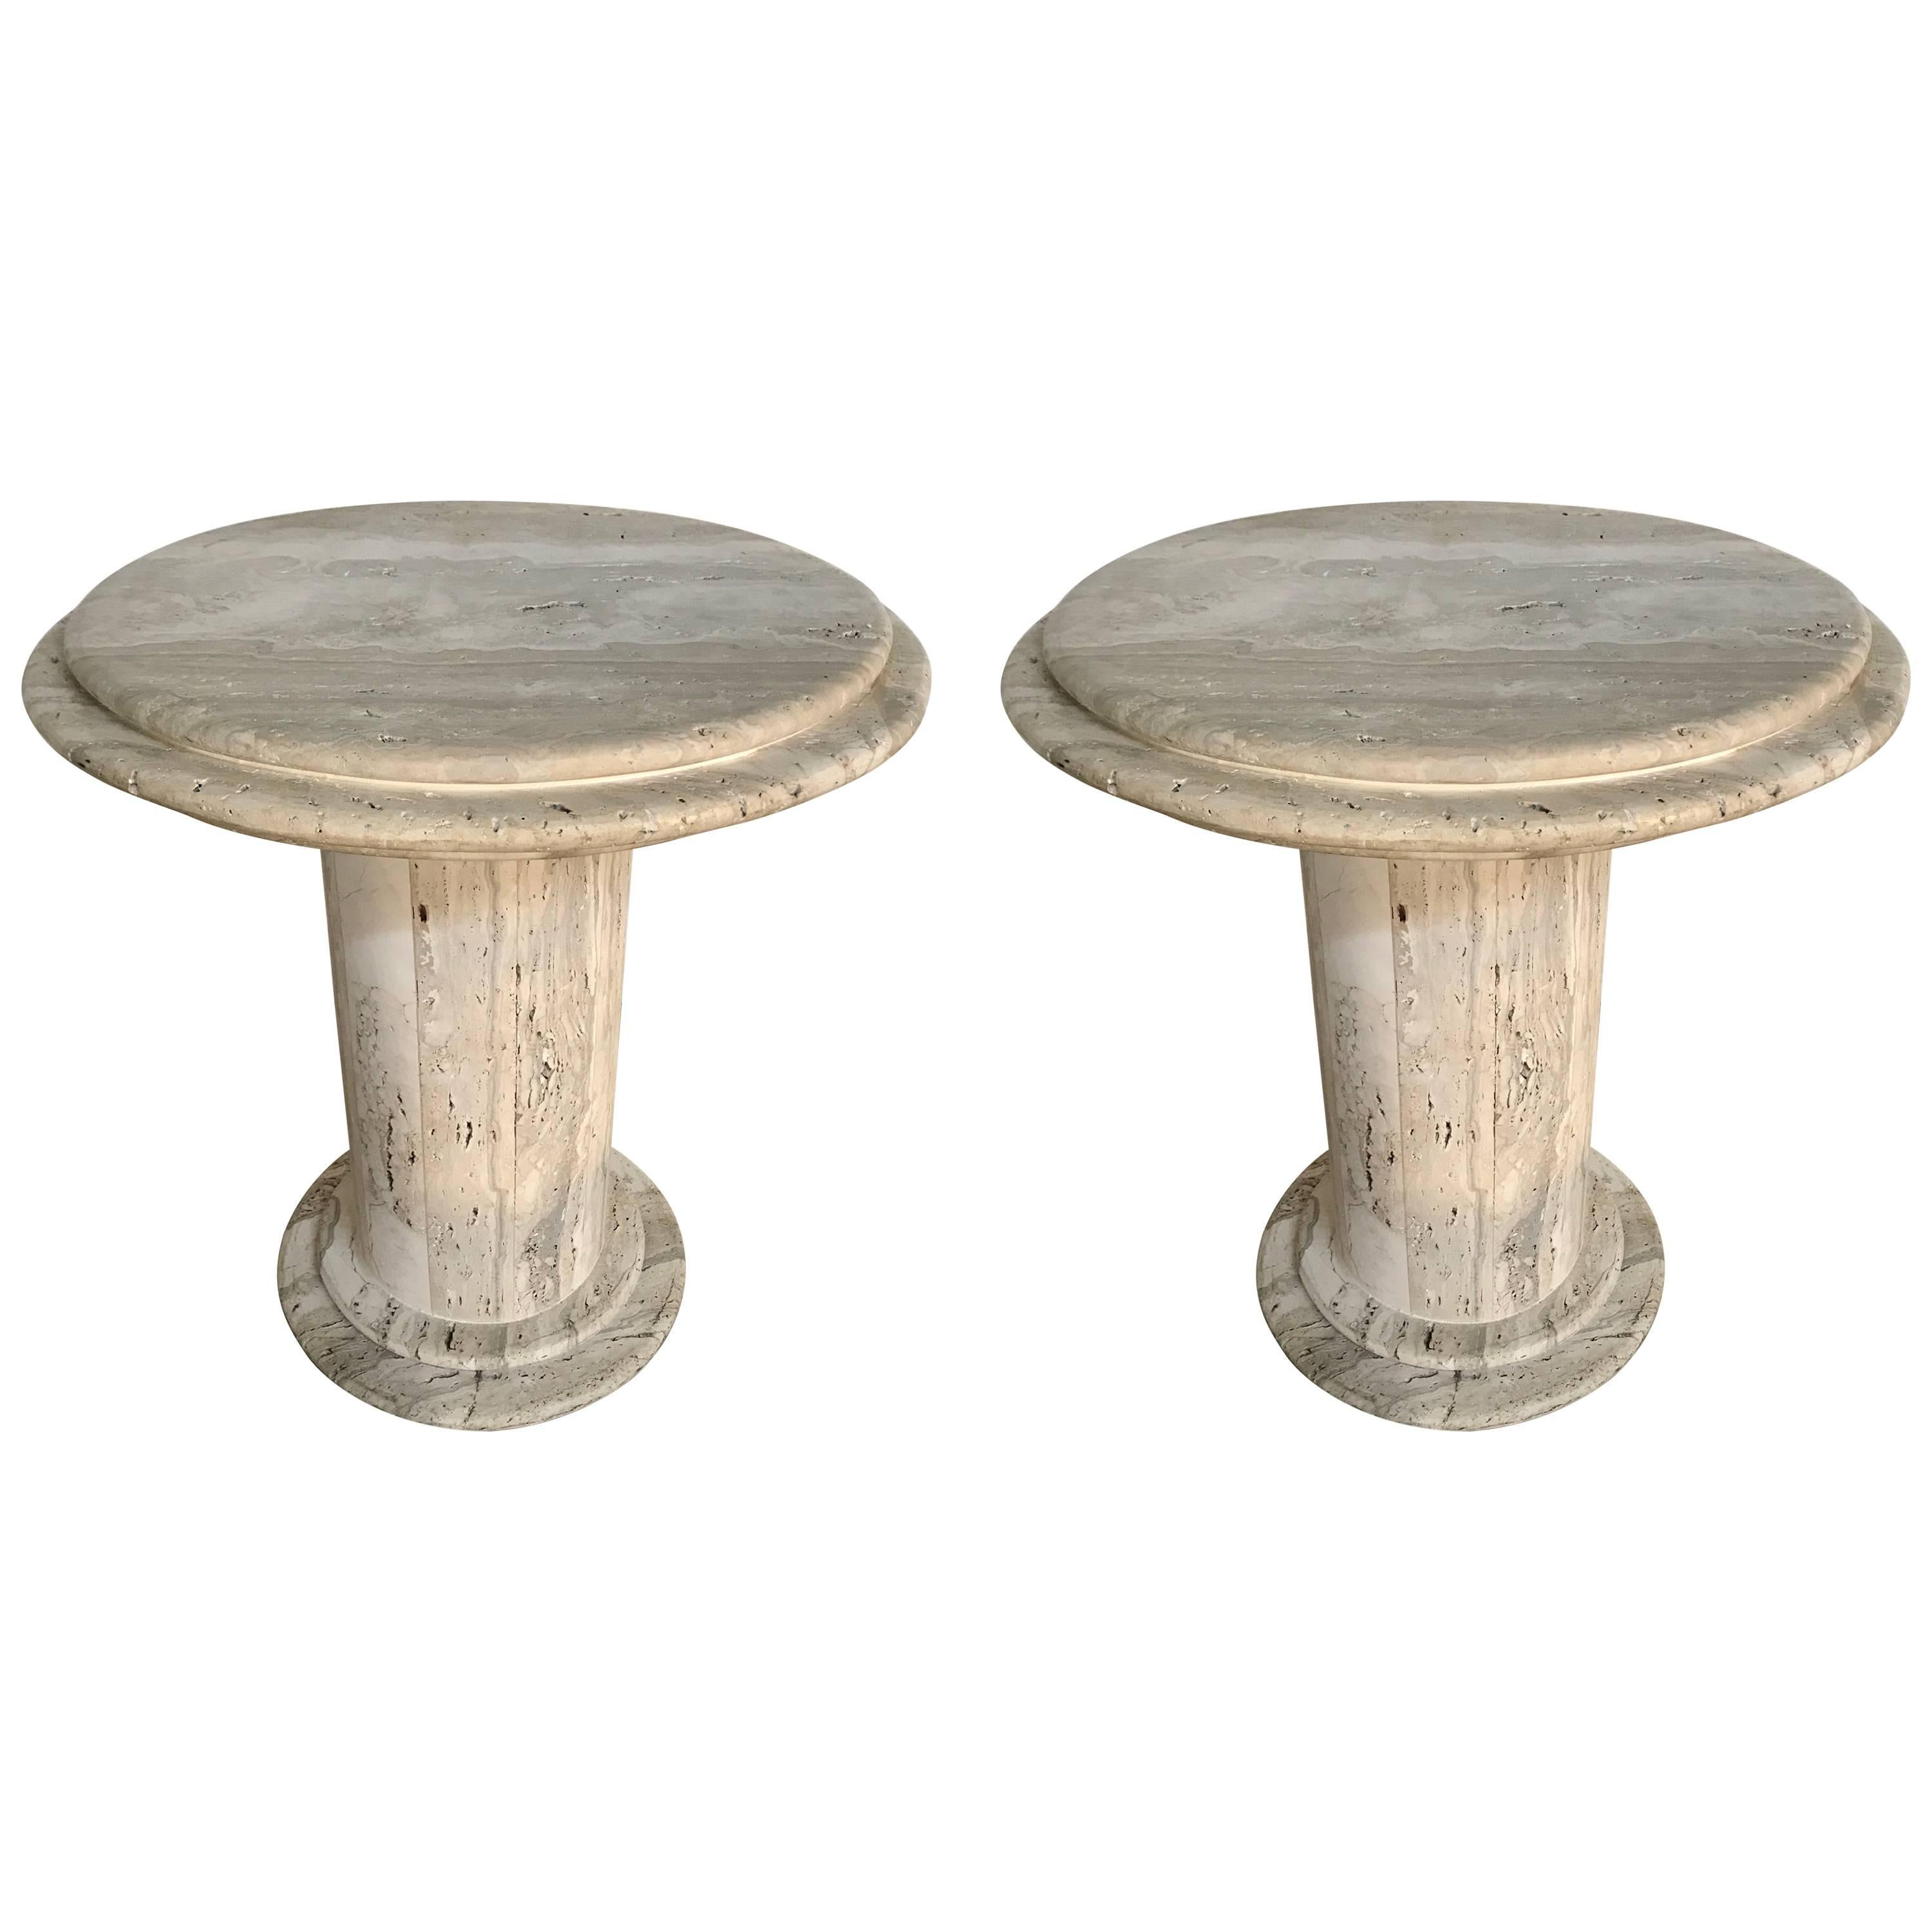 Pair of Post-Modern Italian Travertine TOTEM Side/End Tables